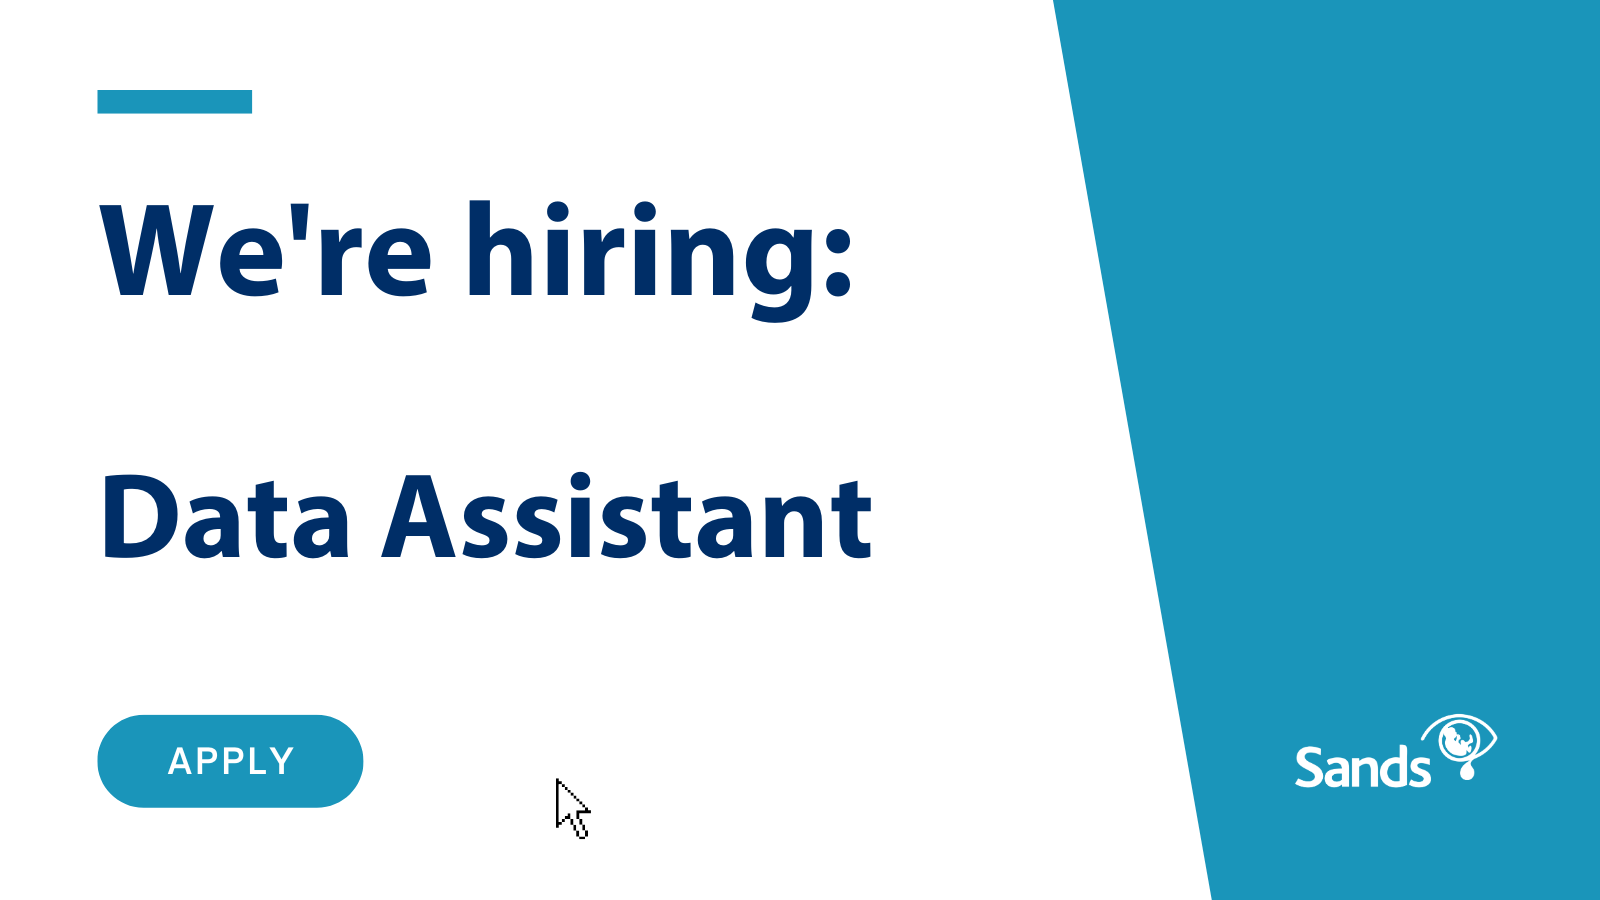 We are hiring Data Assistant